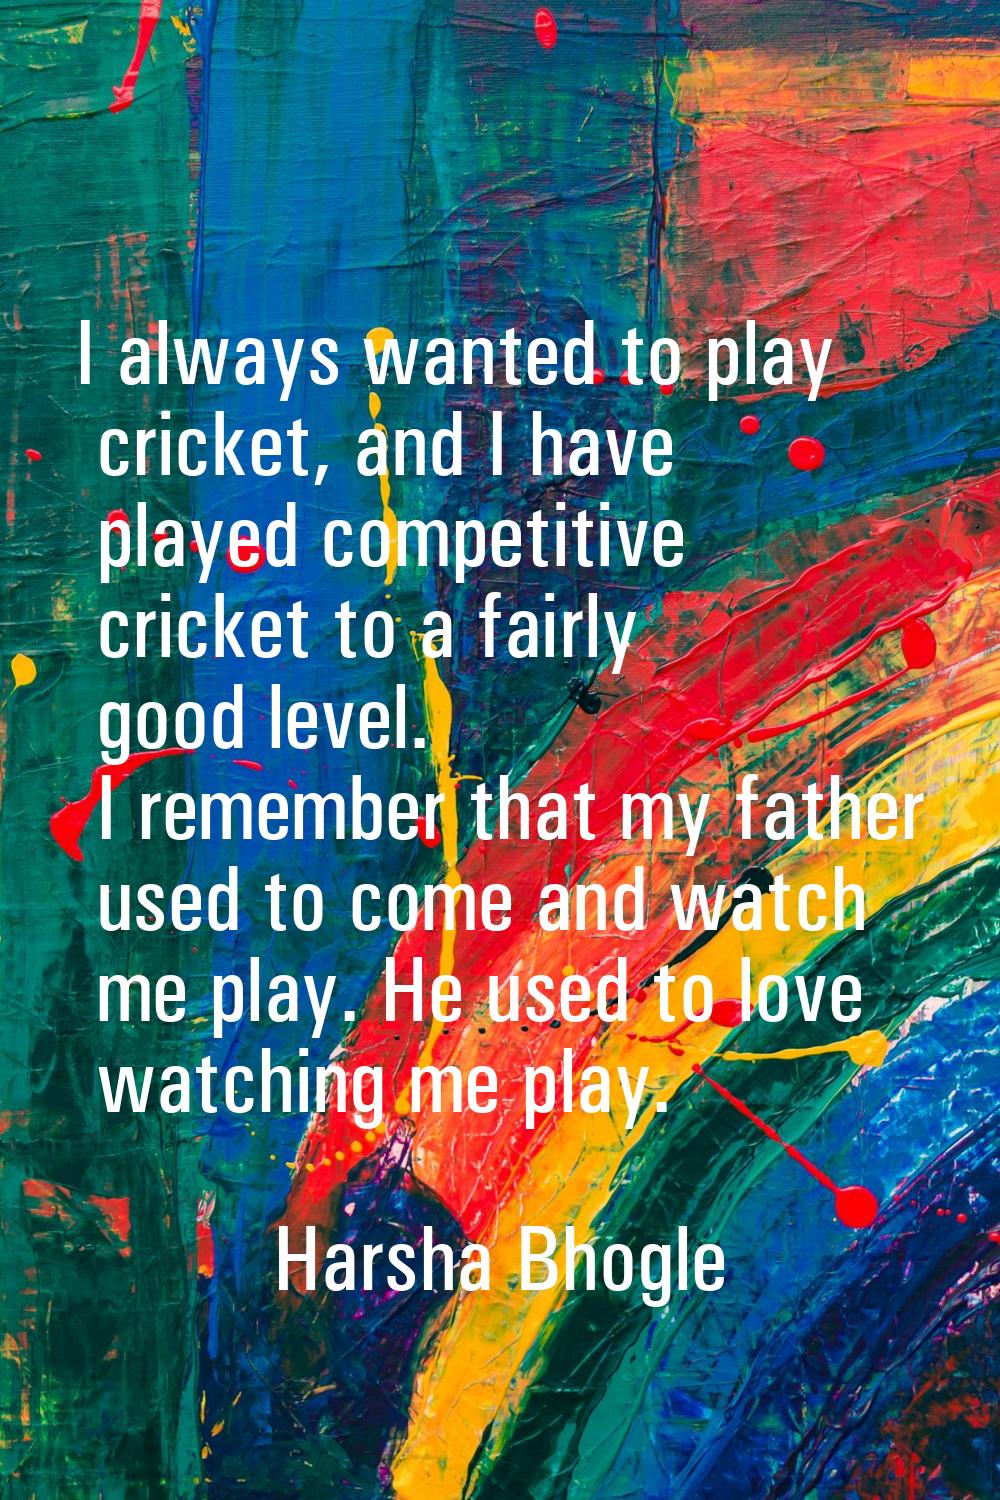 I always wanted to play cricket, and I have played competitive cricket to a fairly good level. I re